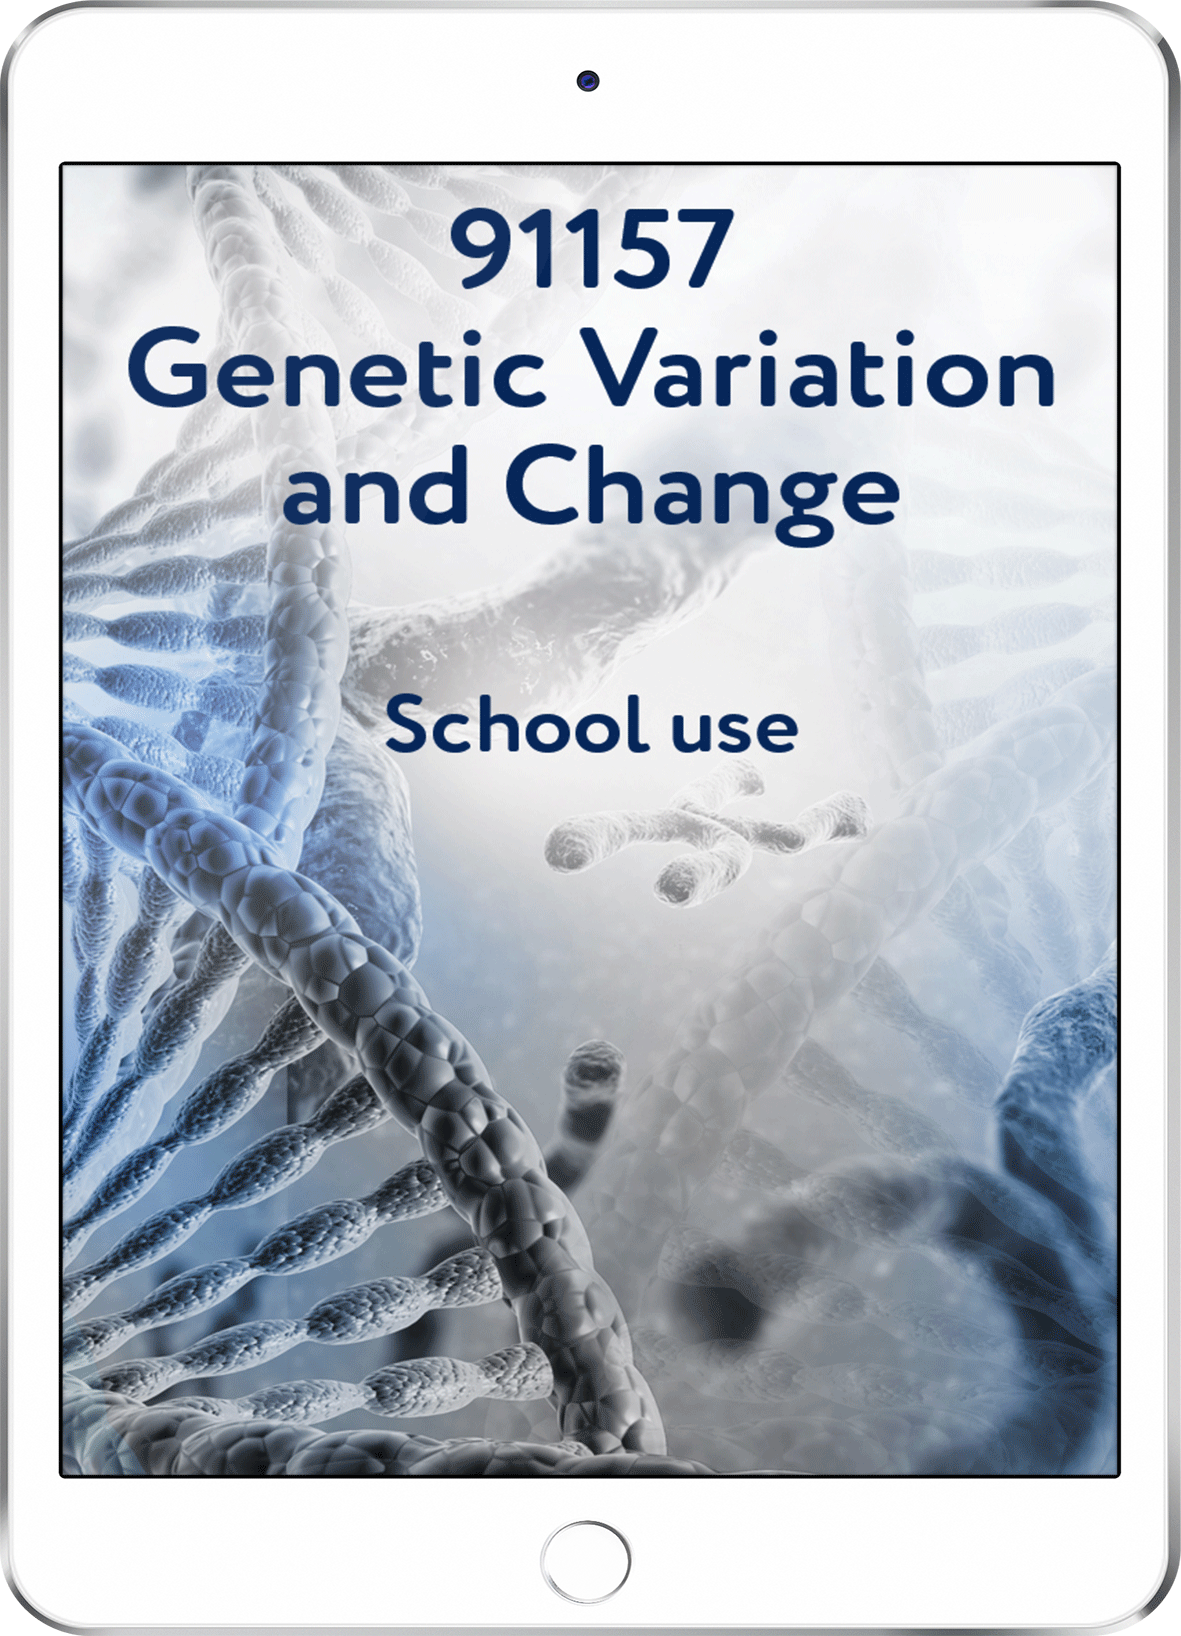 91157 Genetic Variation and Change - School Use